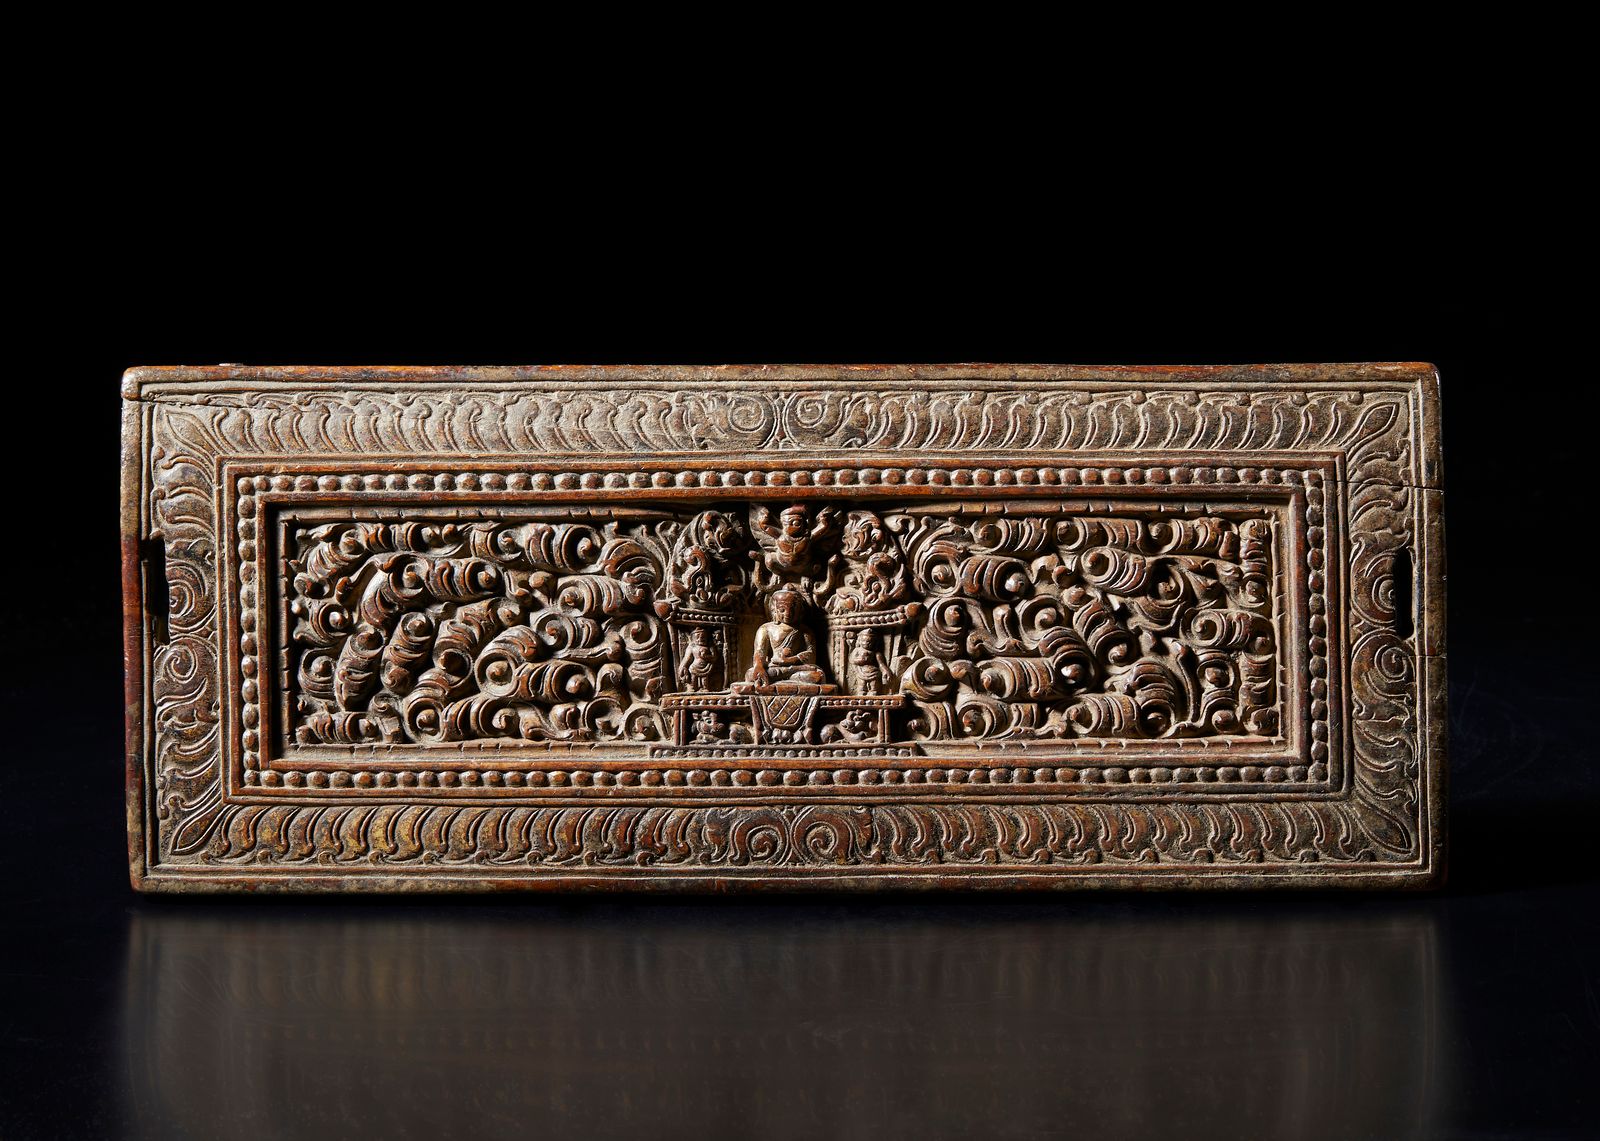 Himalayan Art A wooden book cover carved with the Medicine Buddha Kunst aus dem &hellip;